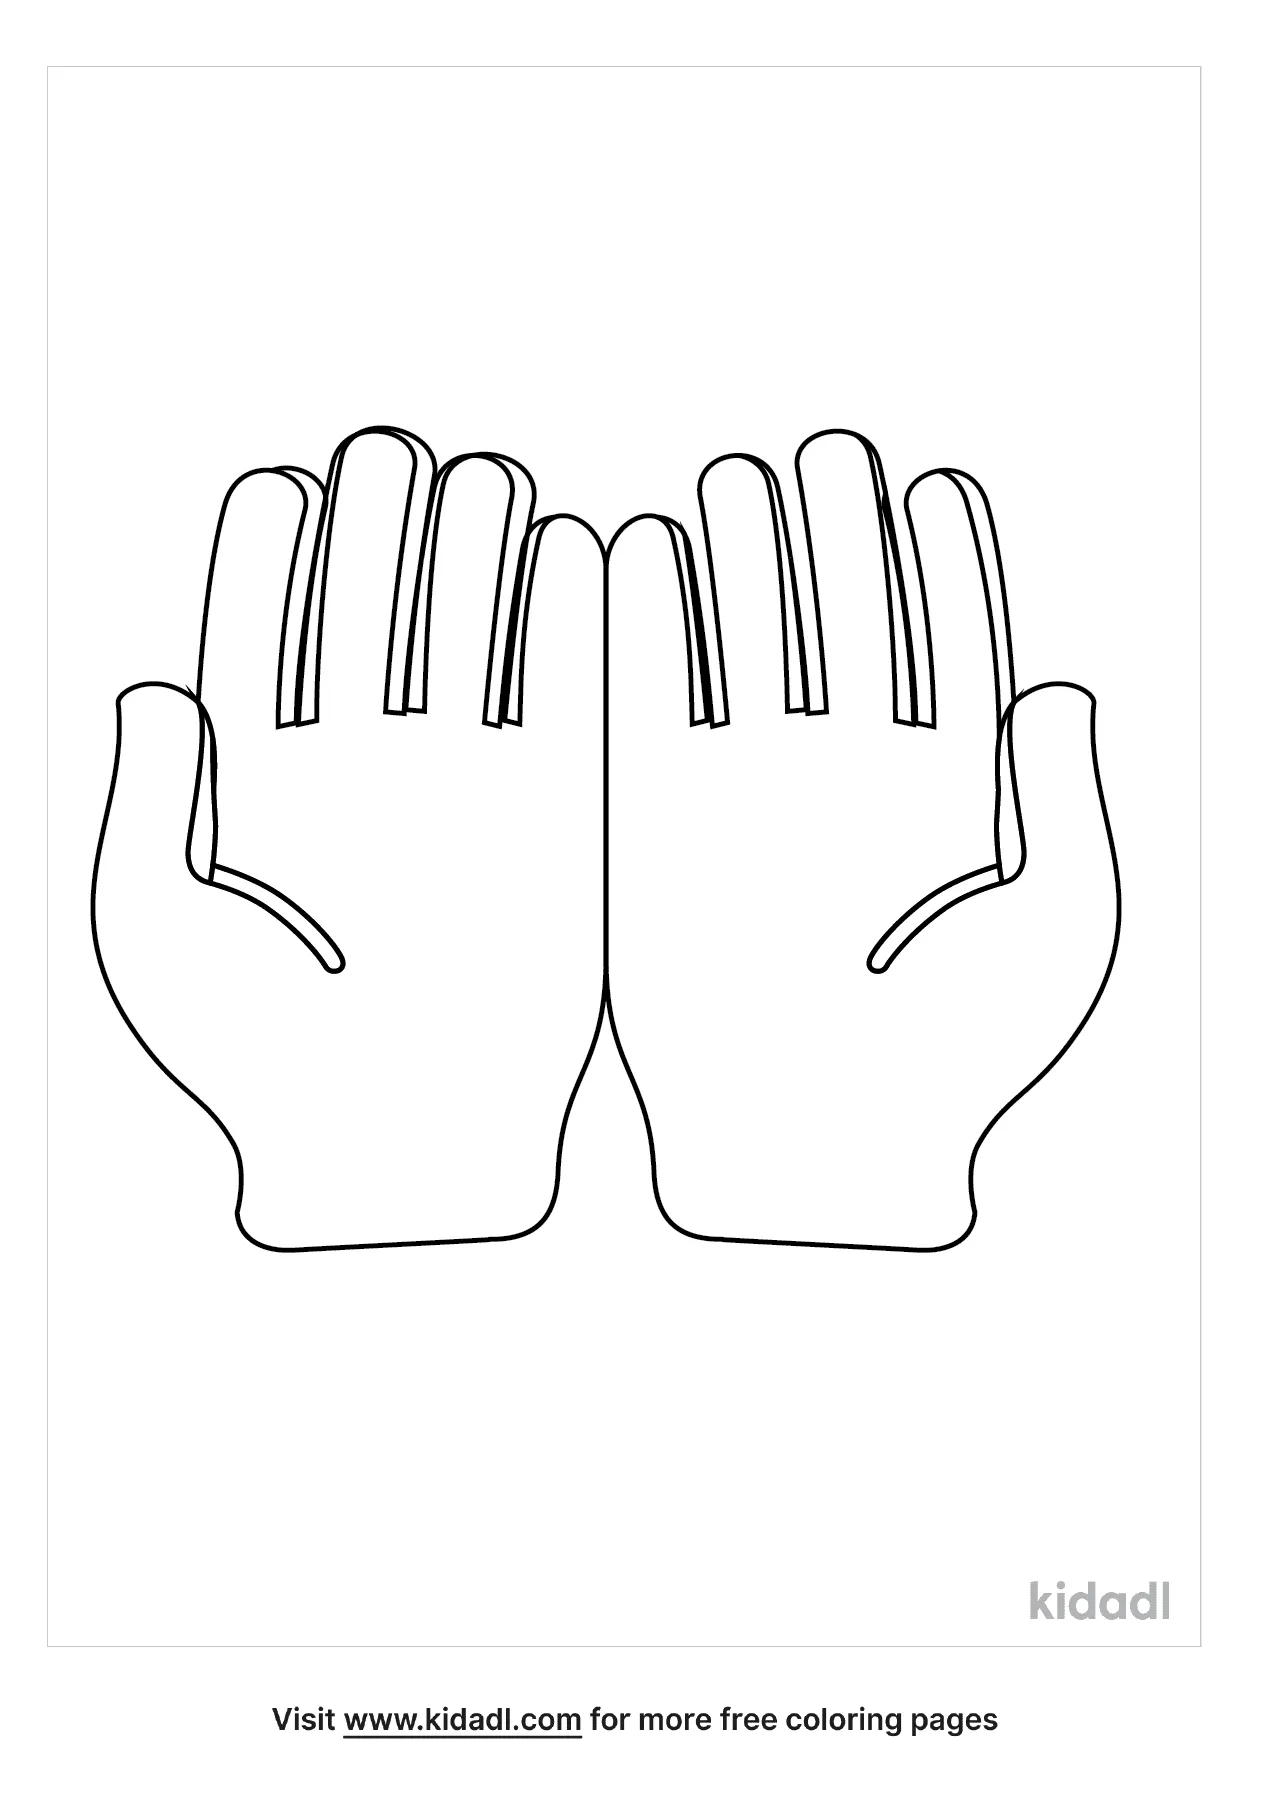 Free hands of prayer coloring page coloring page printables